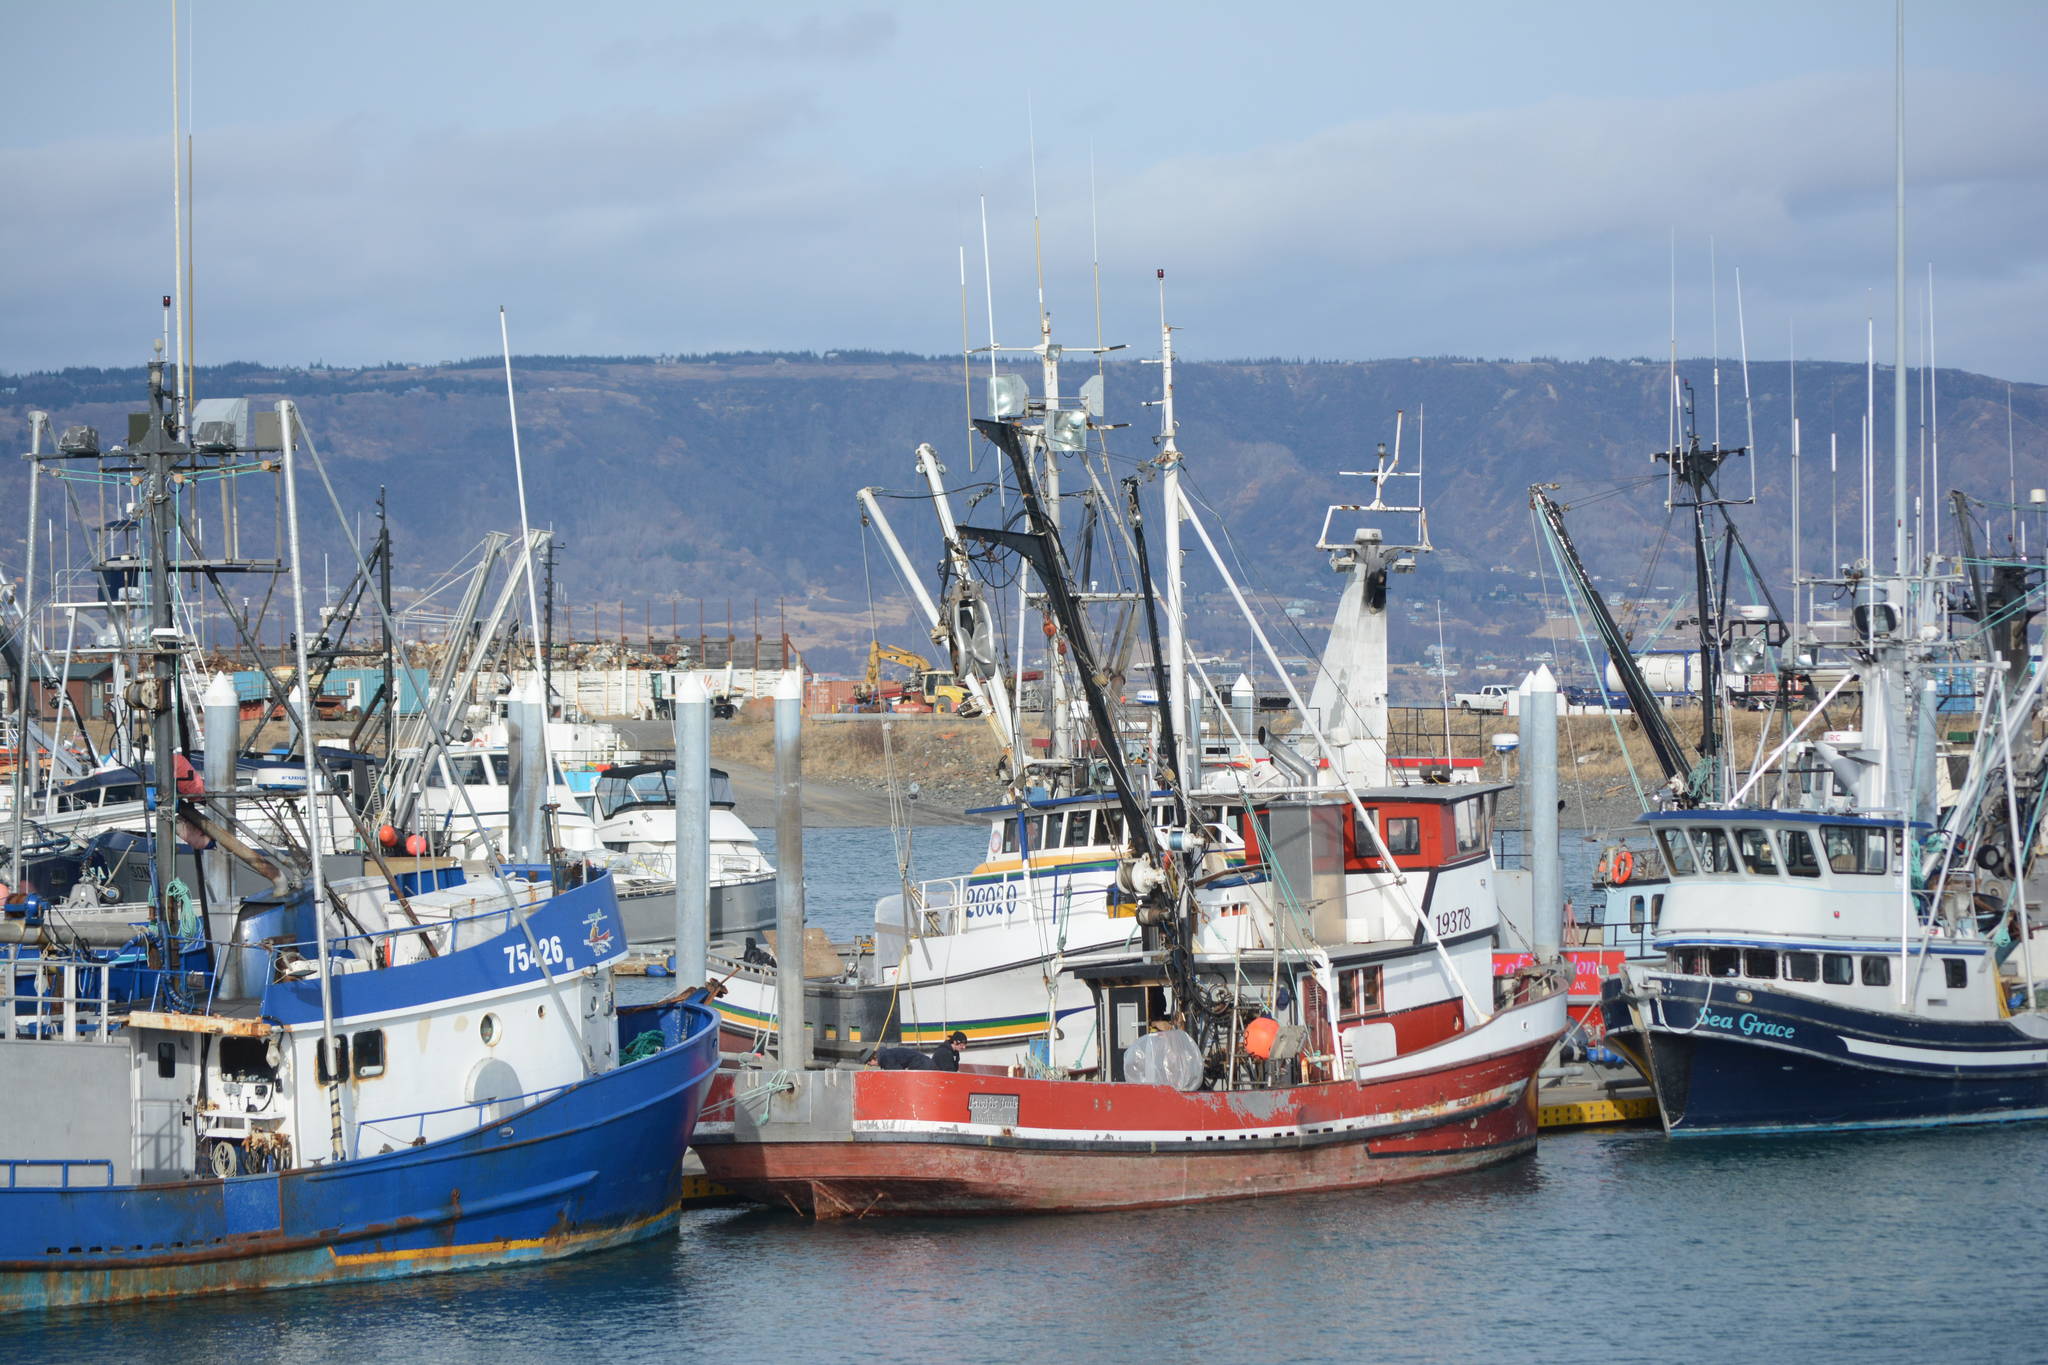 Seawatch: Congress considering safety, climate change for fisheries